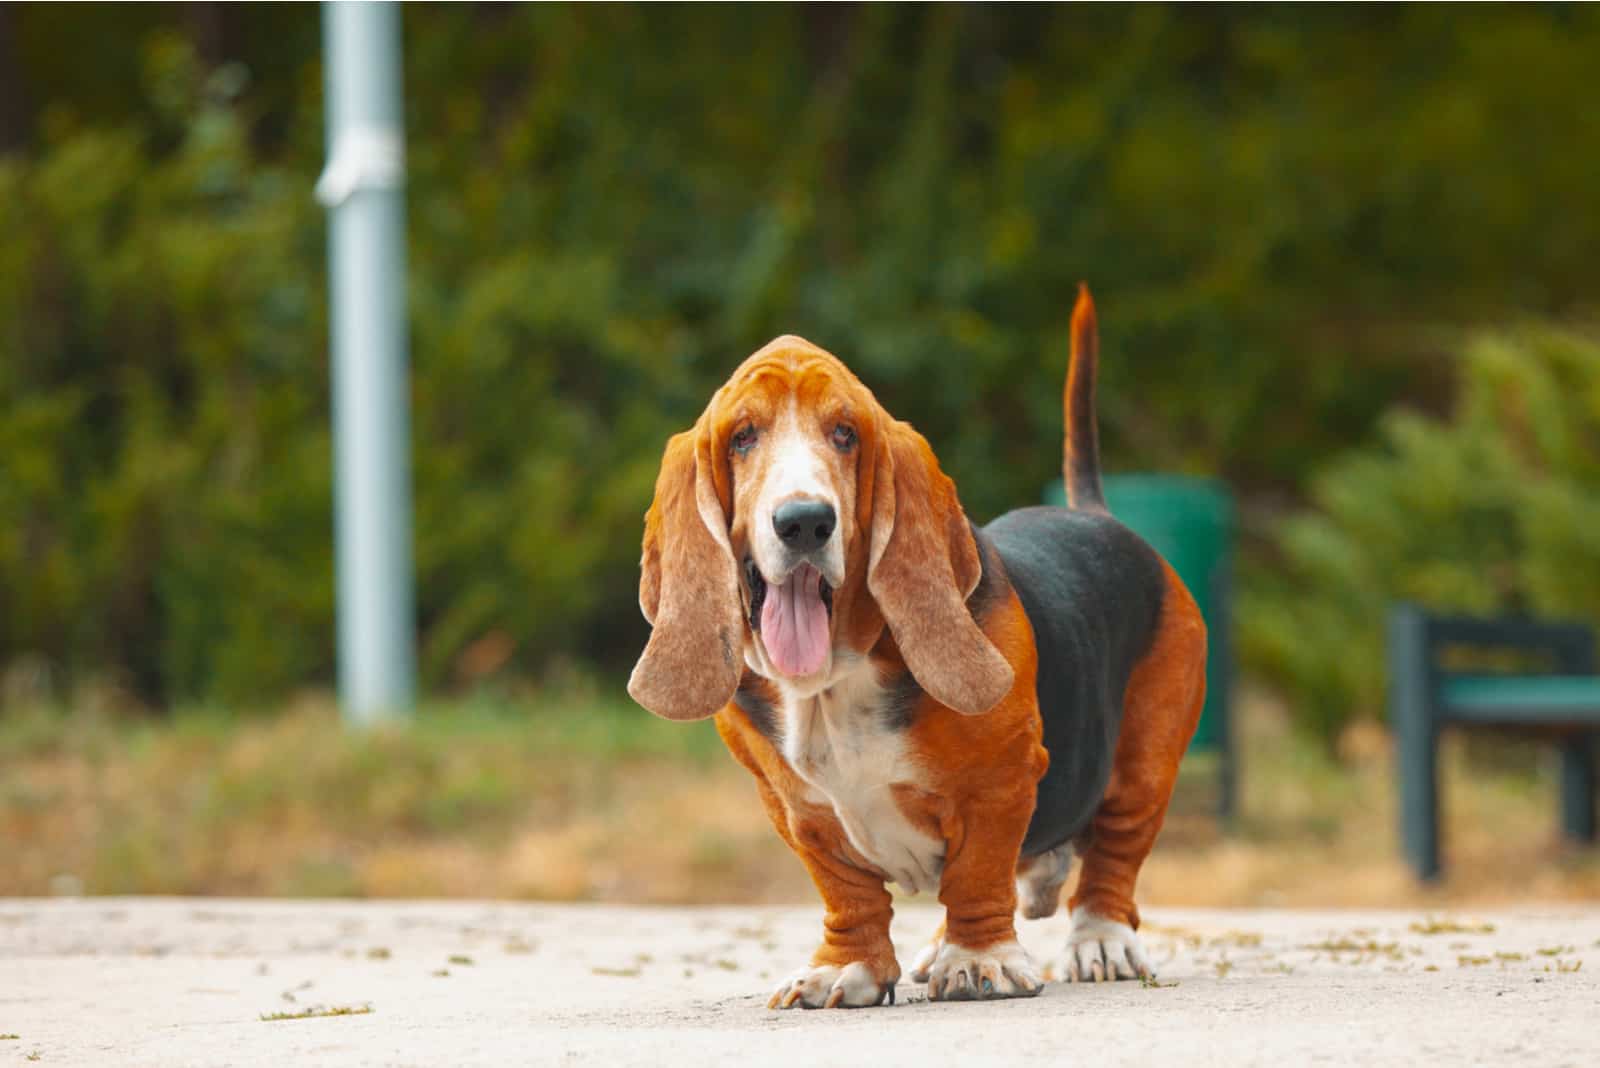 Basset Hound stands and stares ahead